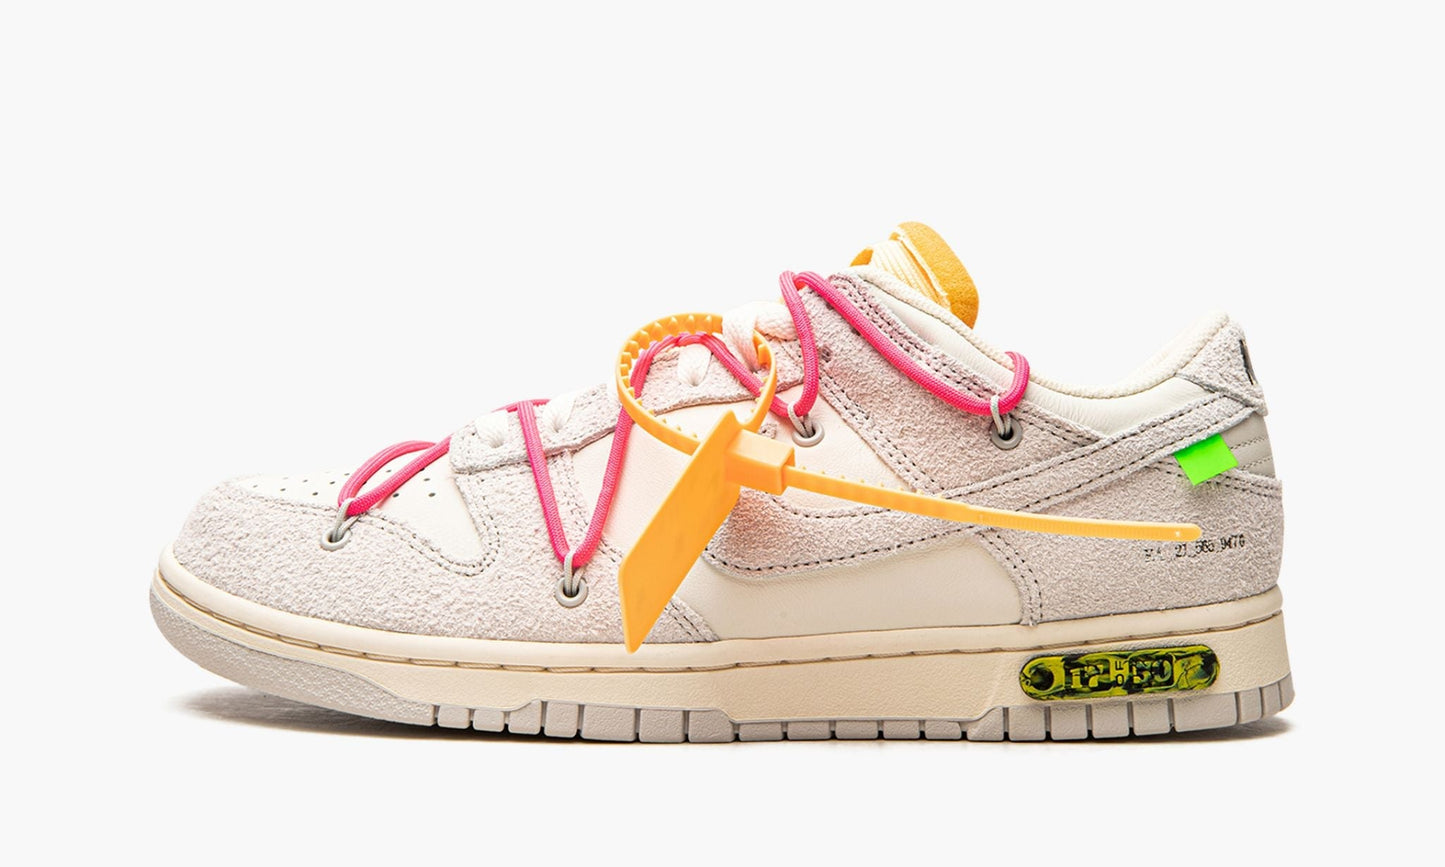 Nike Dunk Low "Off White - Lot 17"